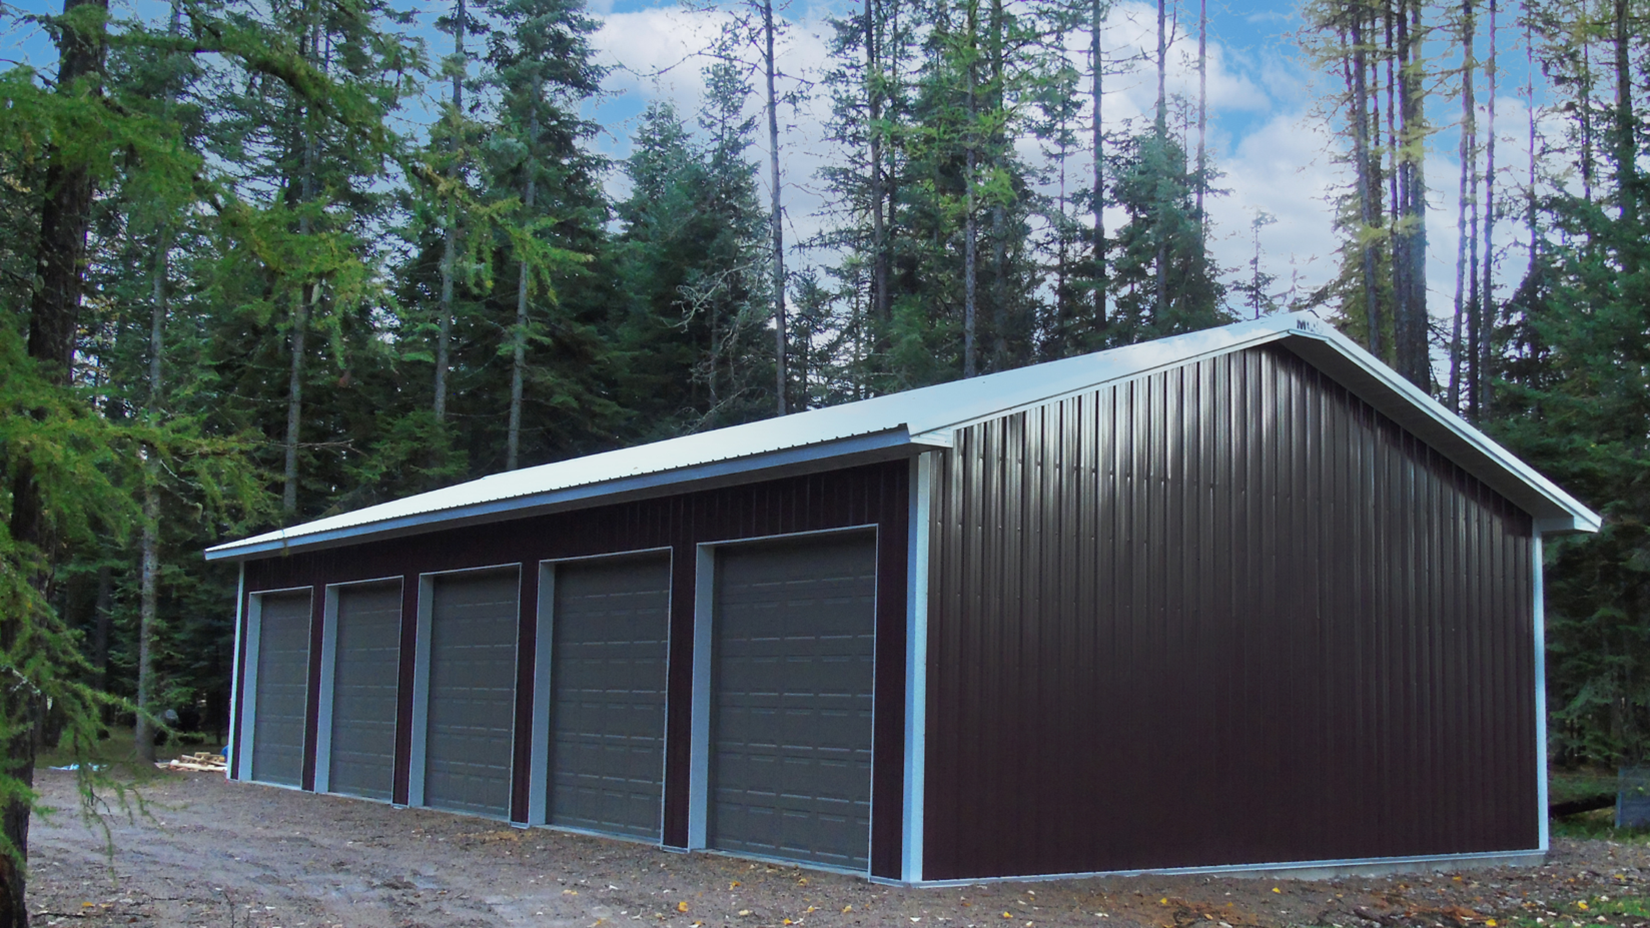 What You Need to Know About Choosing Windows for Steel Buildings in Coeur d’Alene